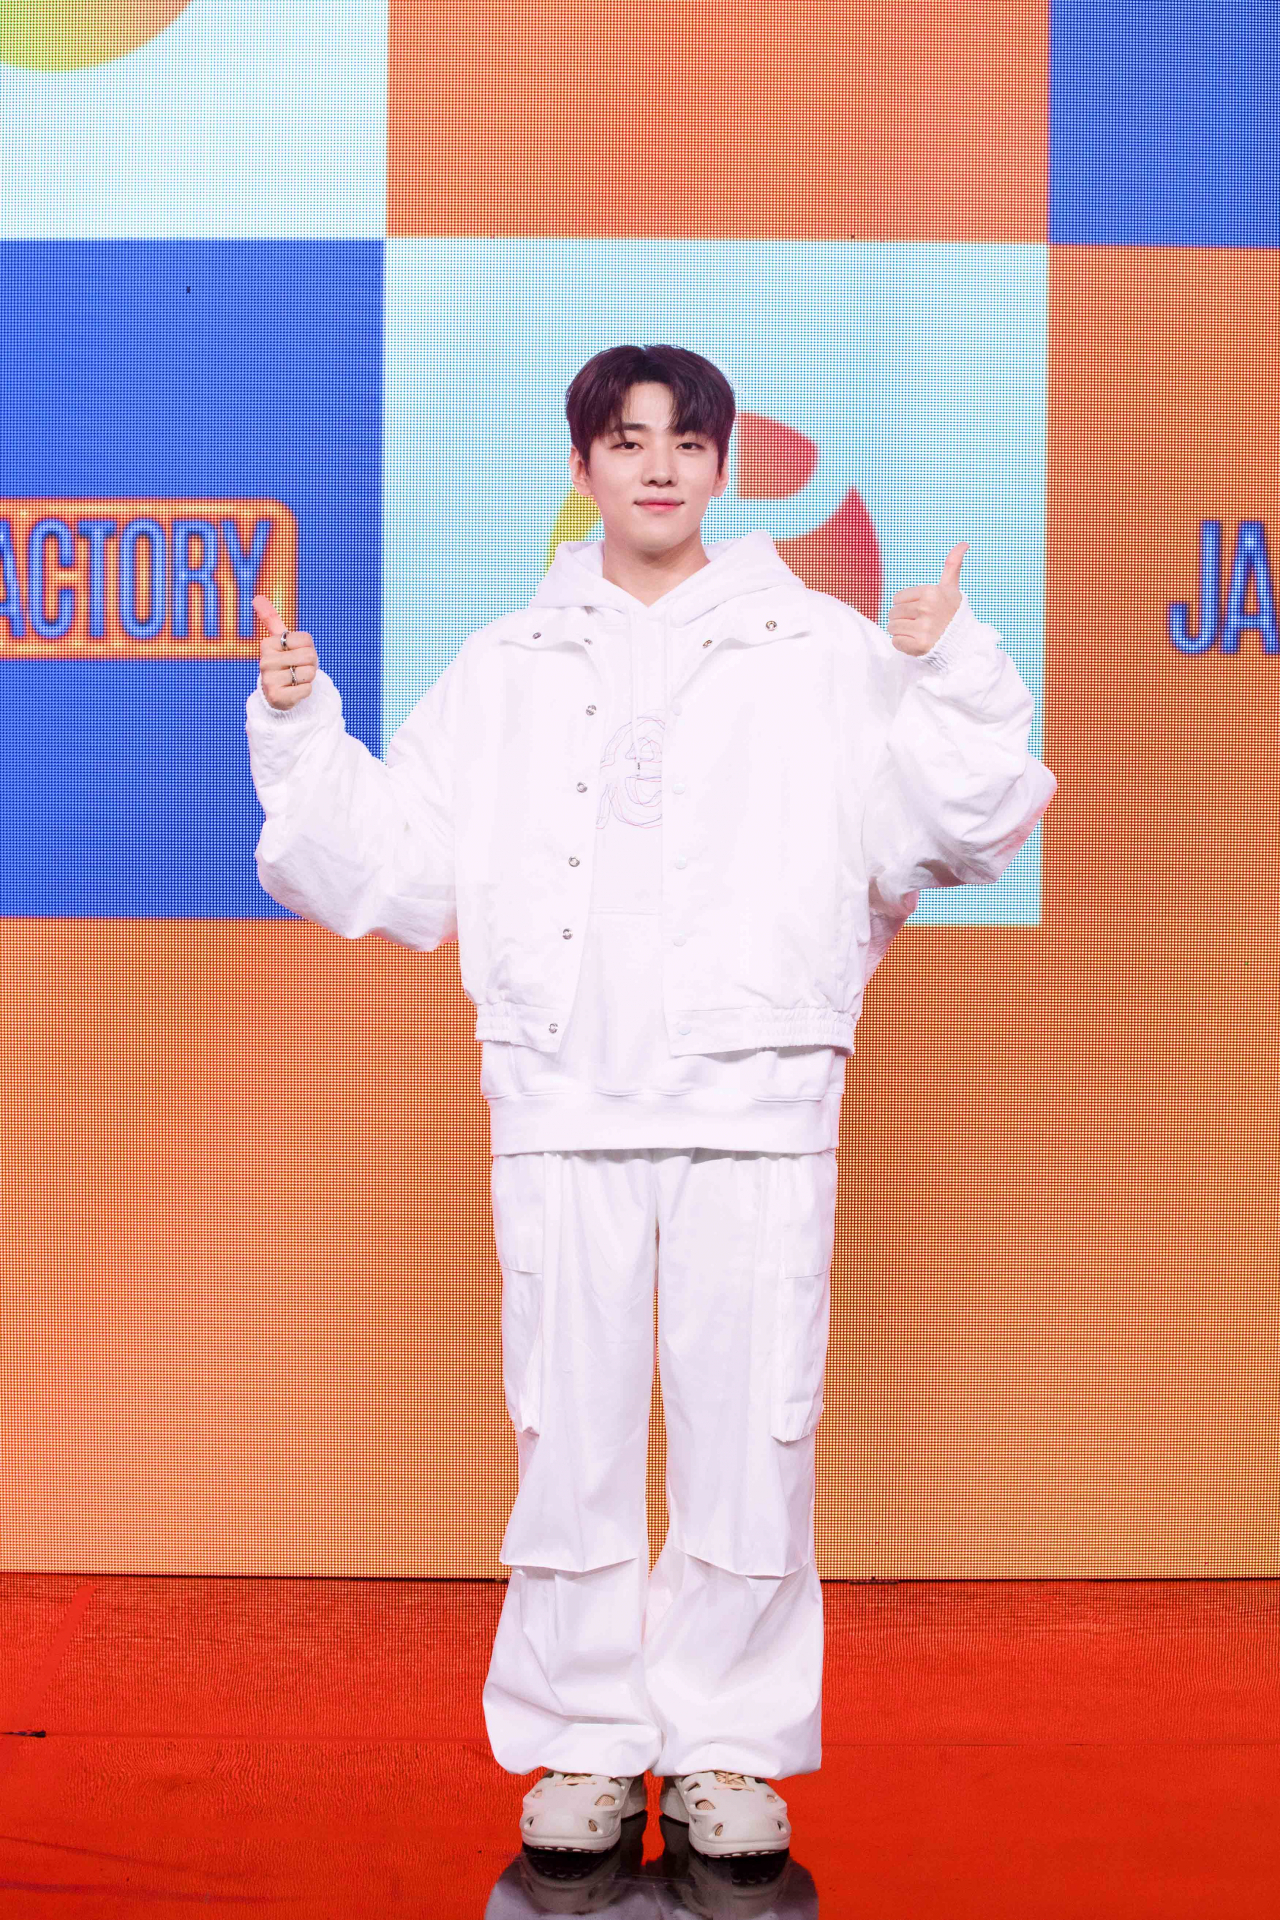 DKZ's Jaechan poses for picture at a press conference for his solo debut album, 